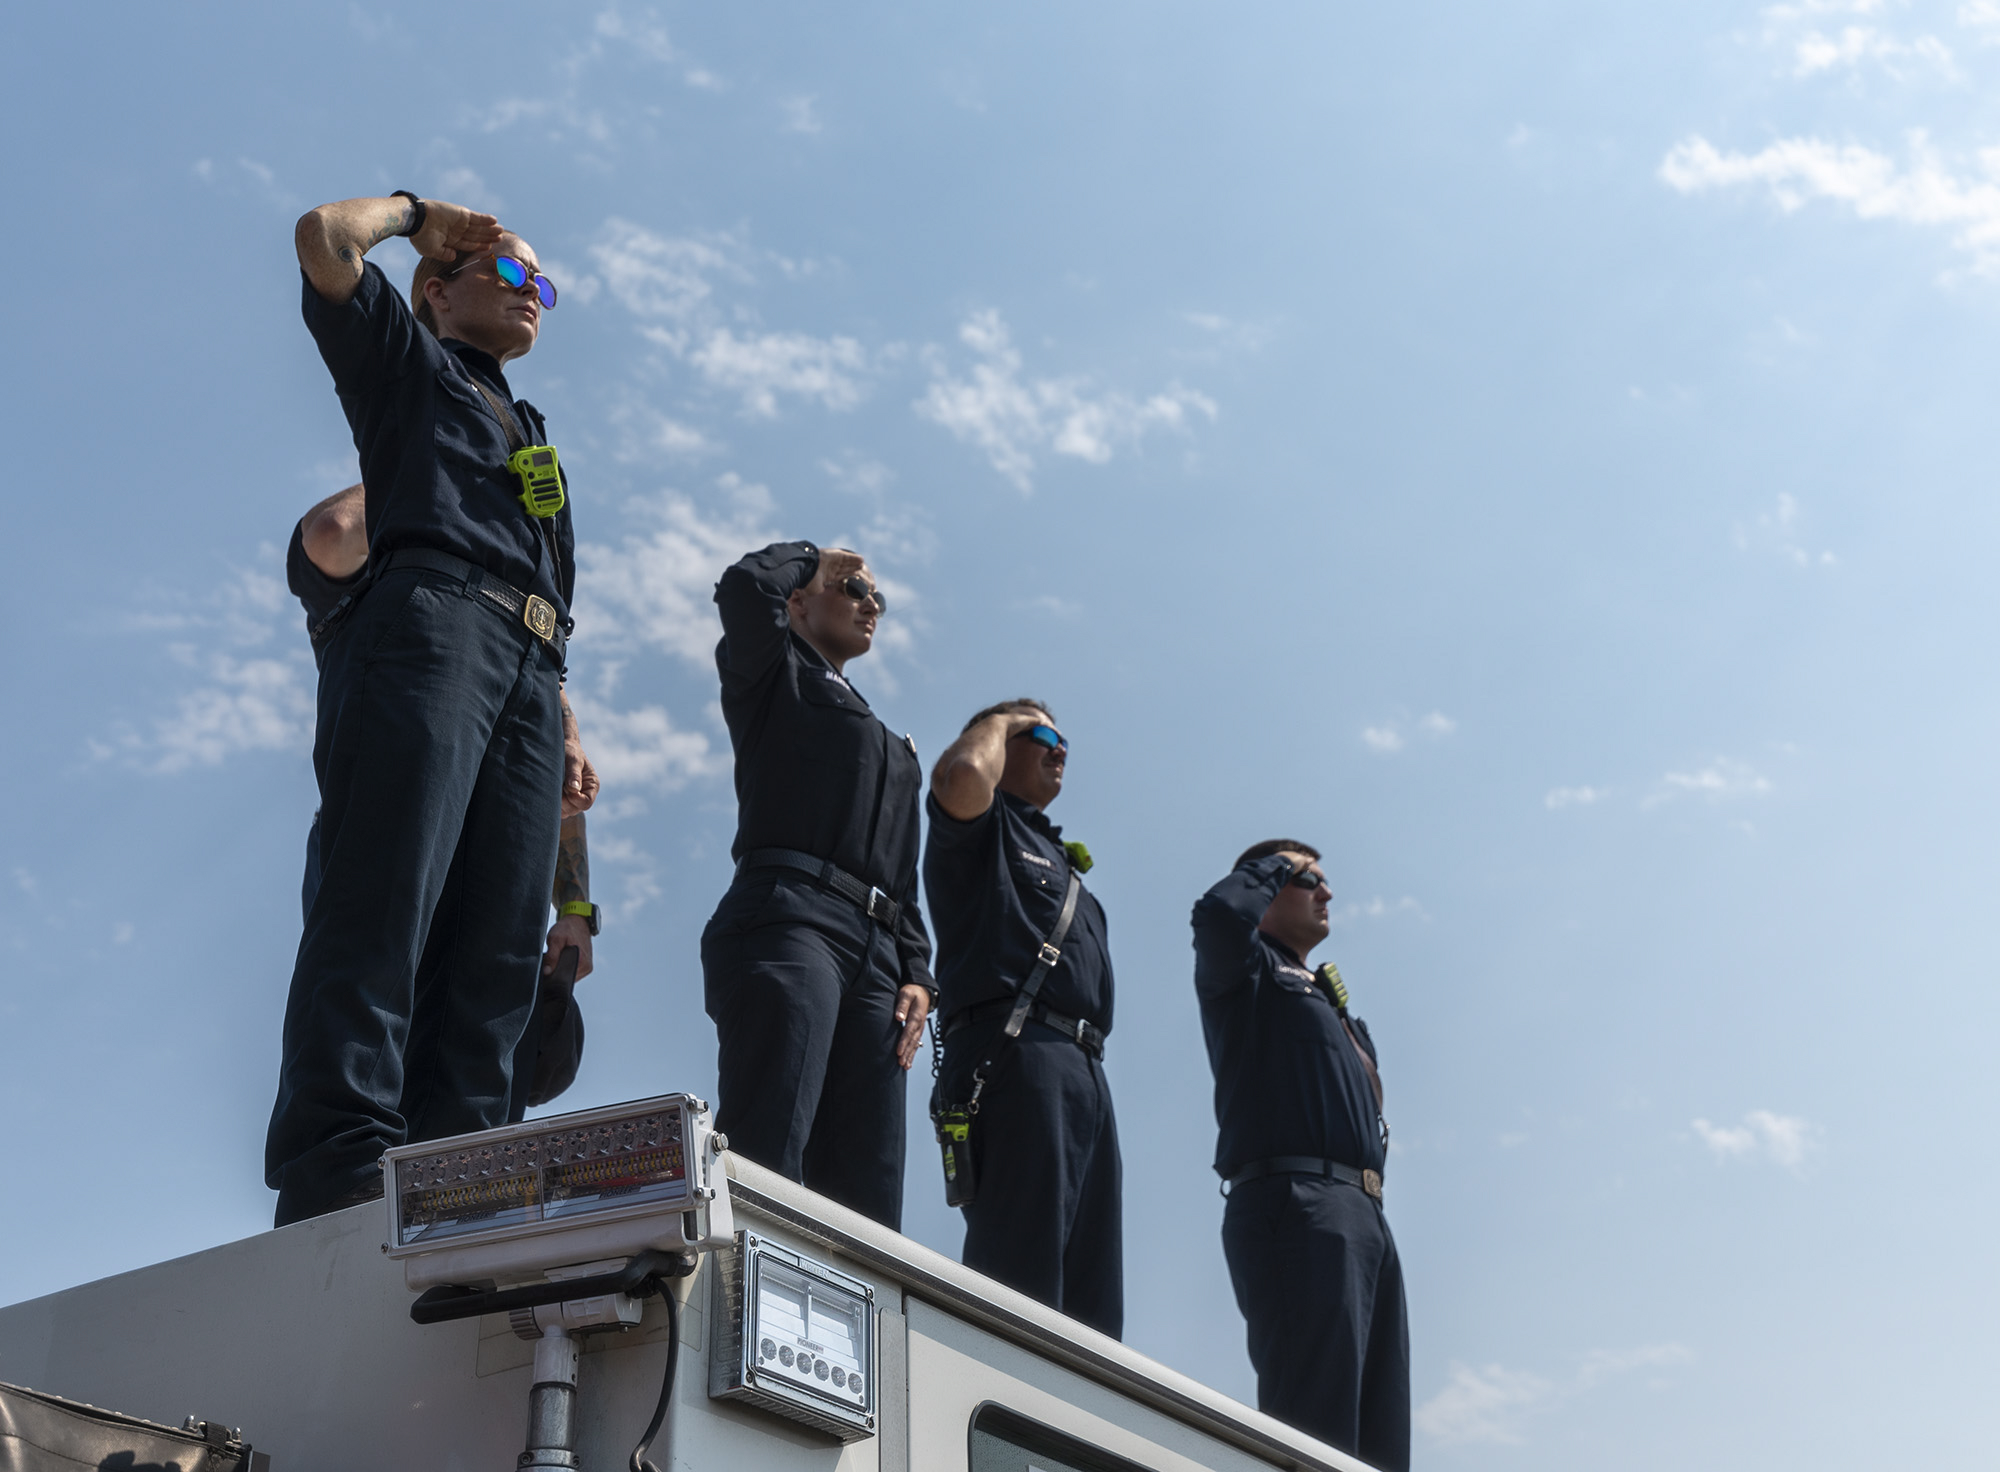 EMTÕs and firefighters from Clark County Fire District 6 stand atop a firetruck and salute as a funeral procession for Clark County Sheriff's Sgt. Jeremy Brown drives north on I-5 on Tuesday, Aug. 3, 2021, at the NE 139th Street overpass in Vancouver.